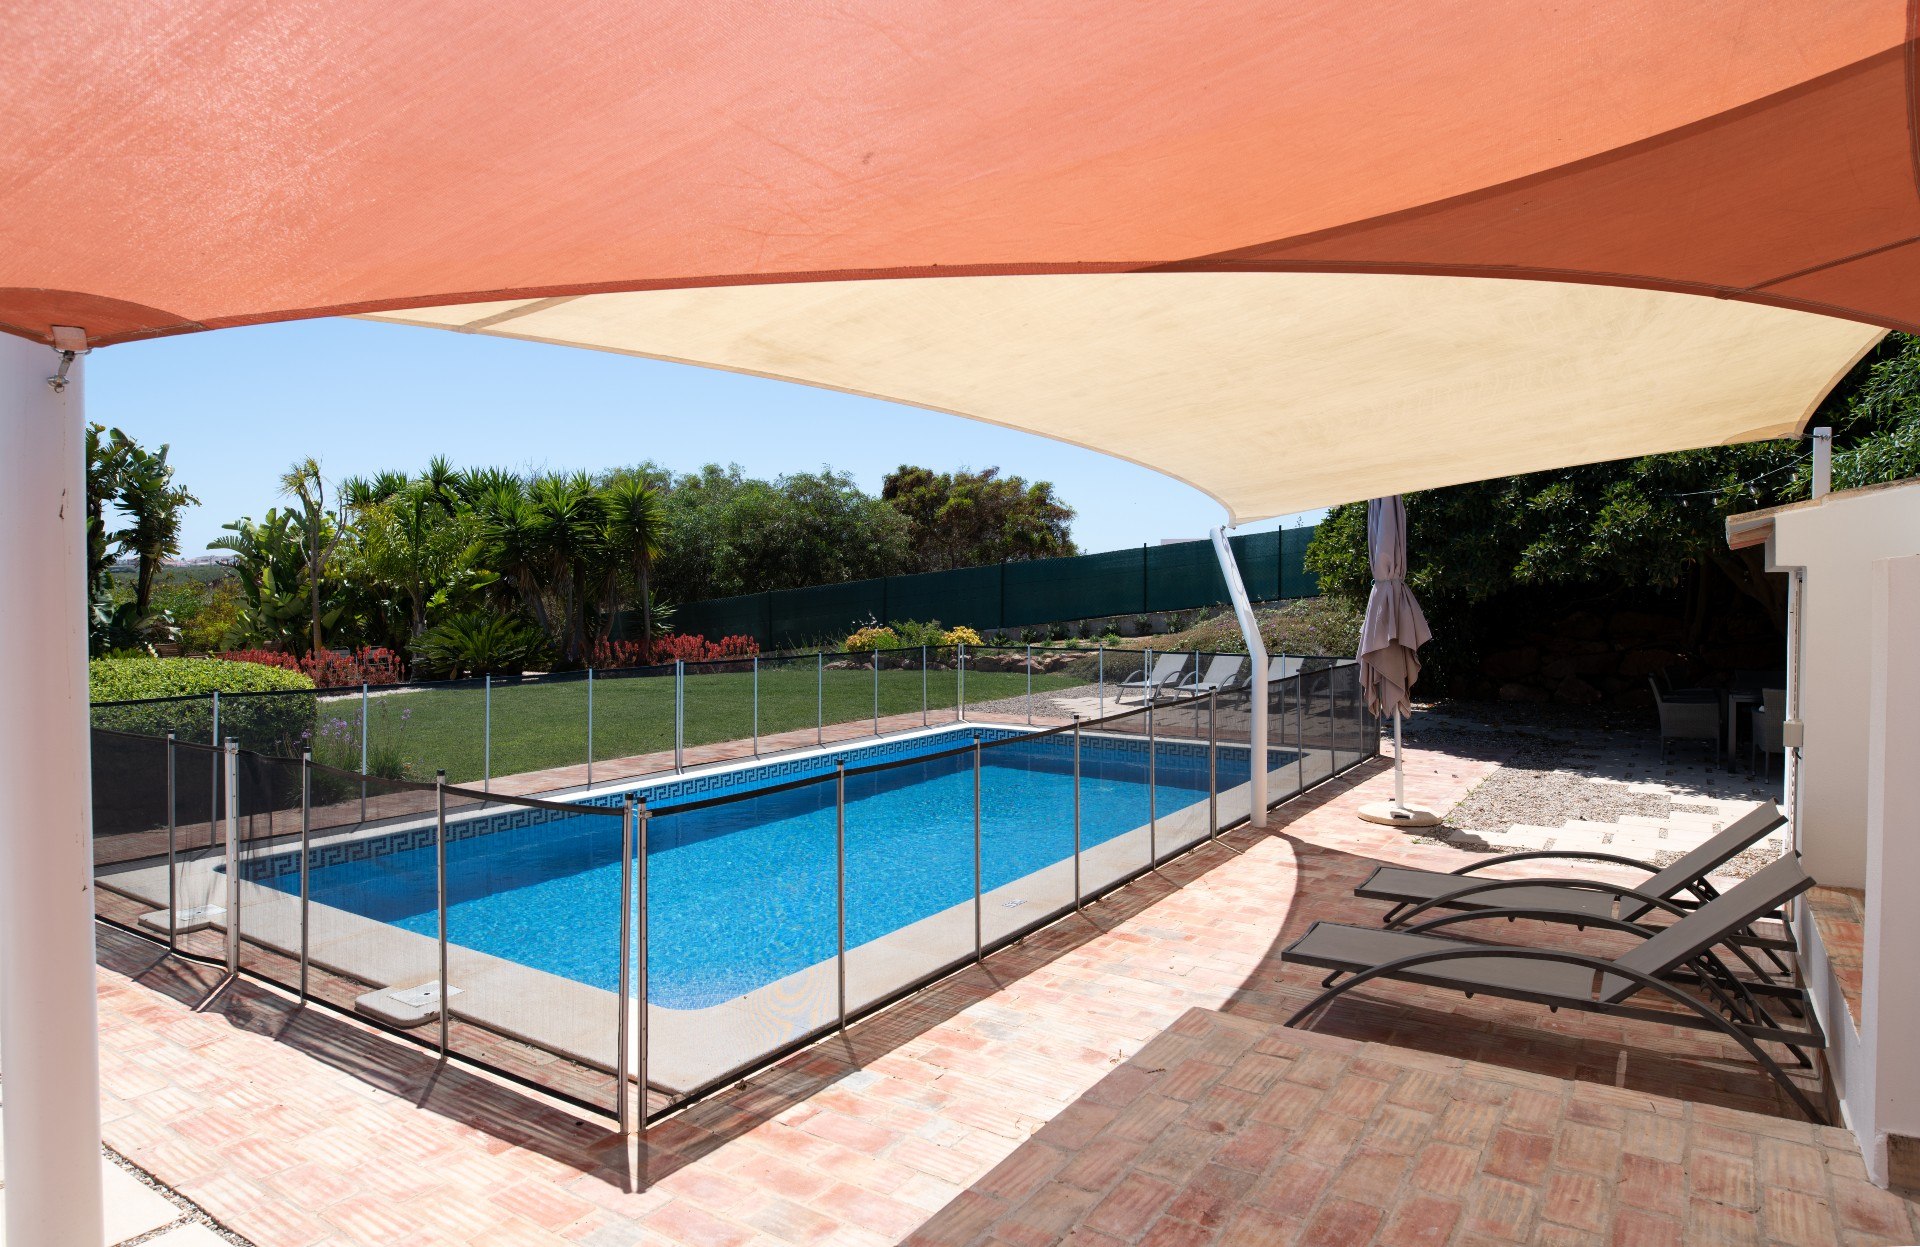 Need Shade in Your Yard This Summer. Try These 10 Shade Sail Options